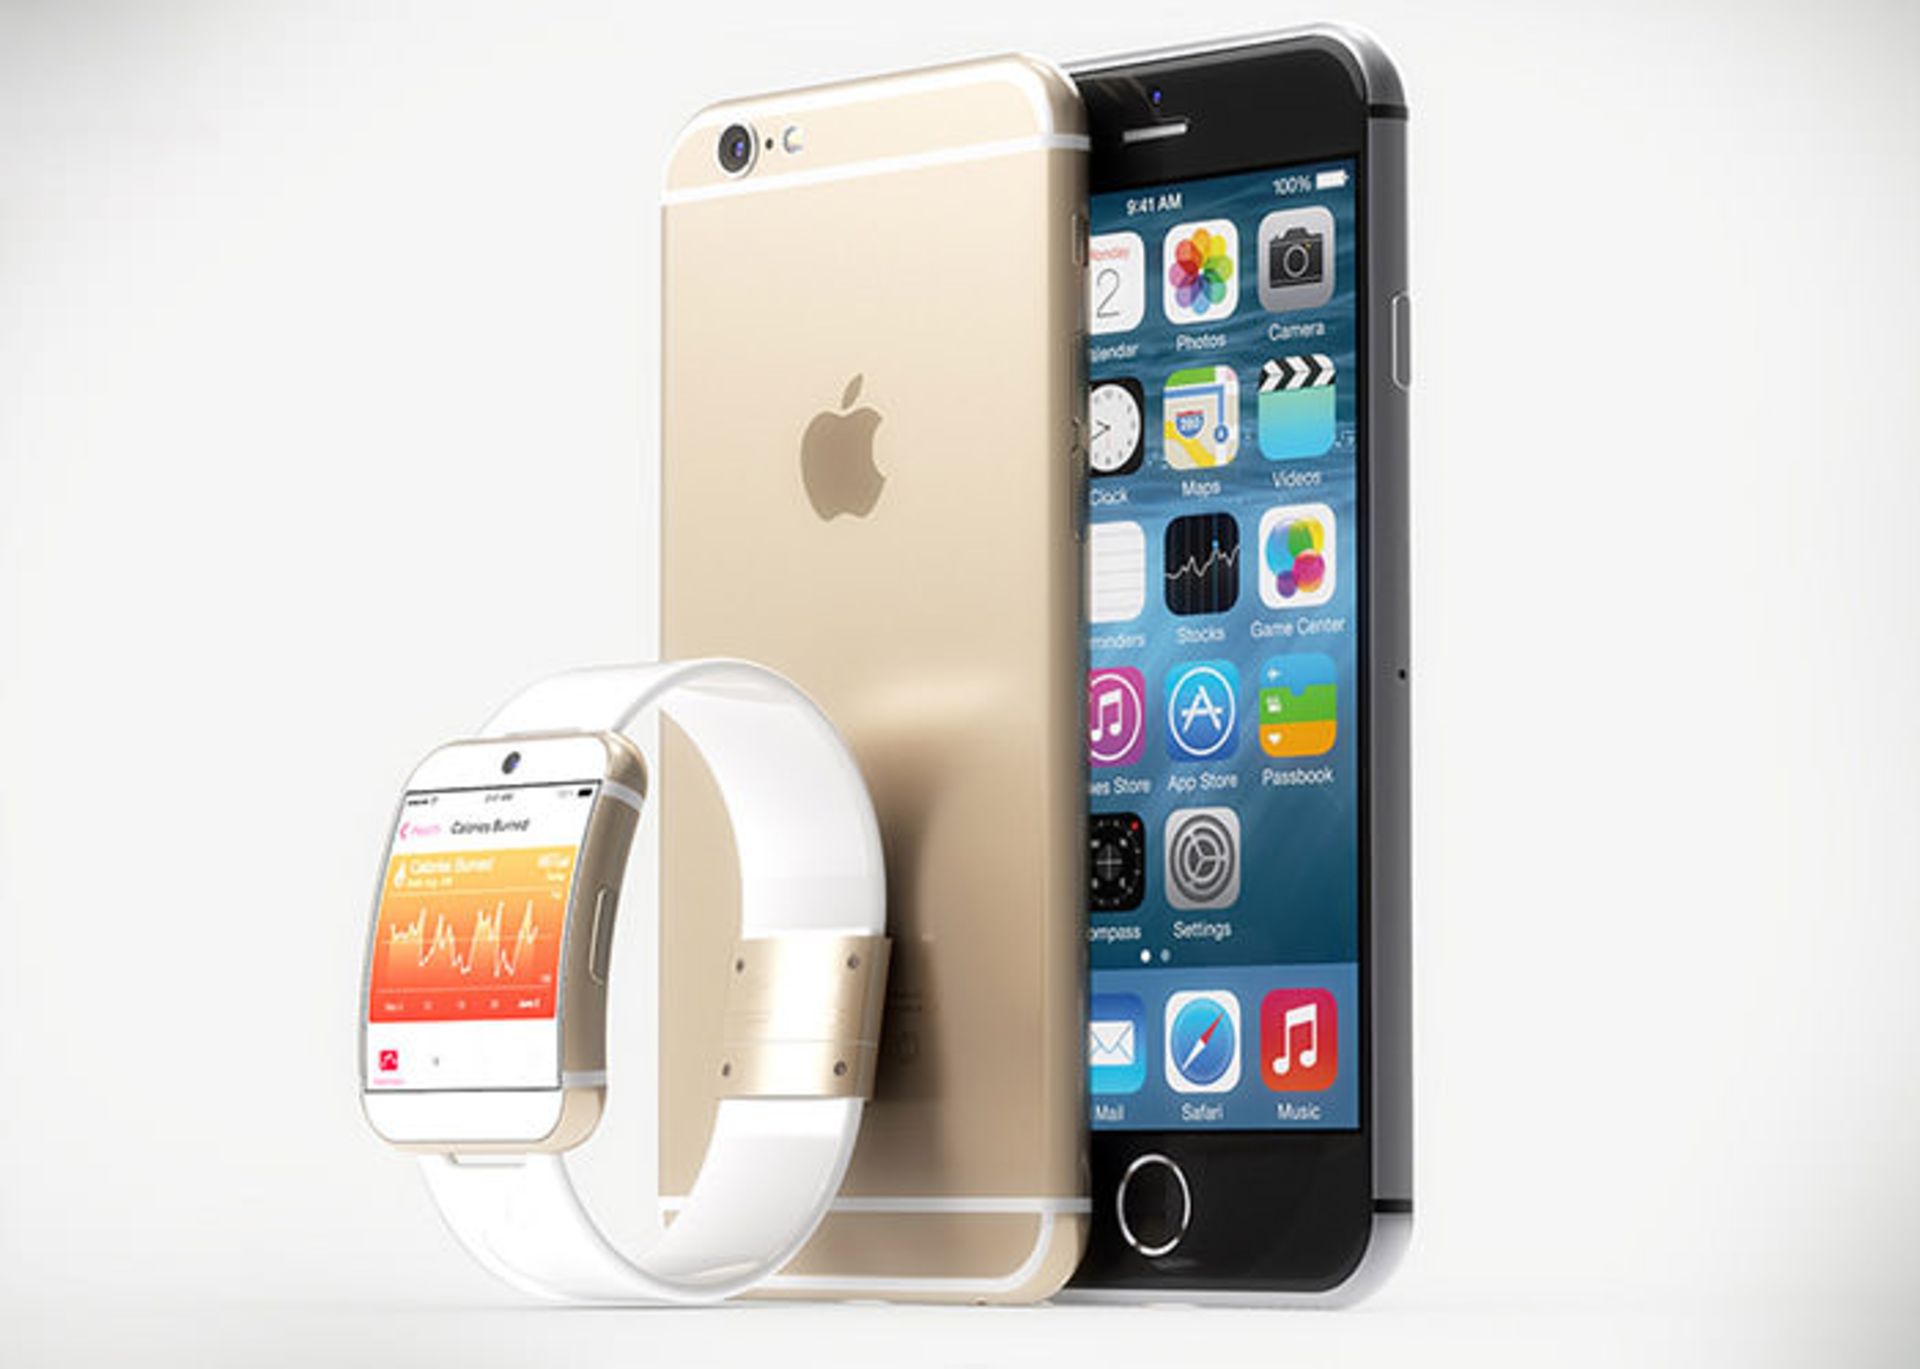 22Apple-iWatch-concept-shows-dreamy-curves-iPhone-esque-looks